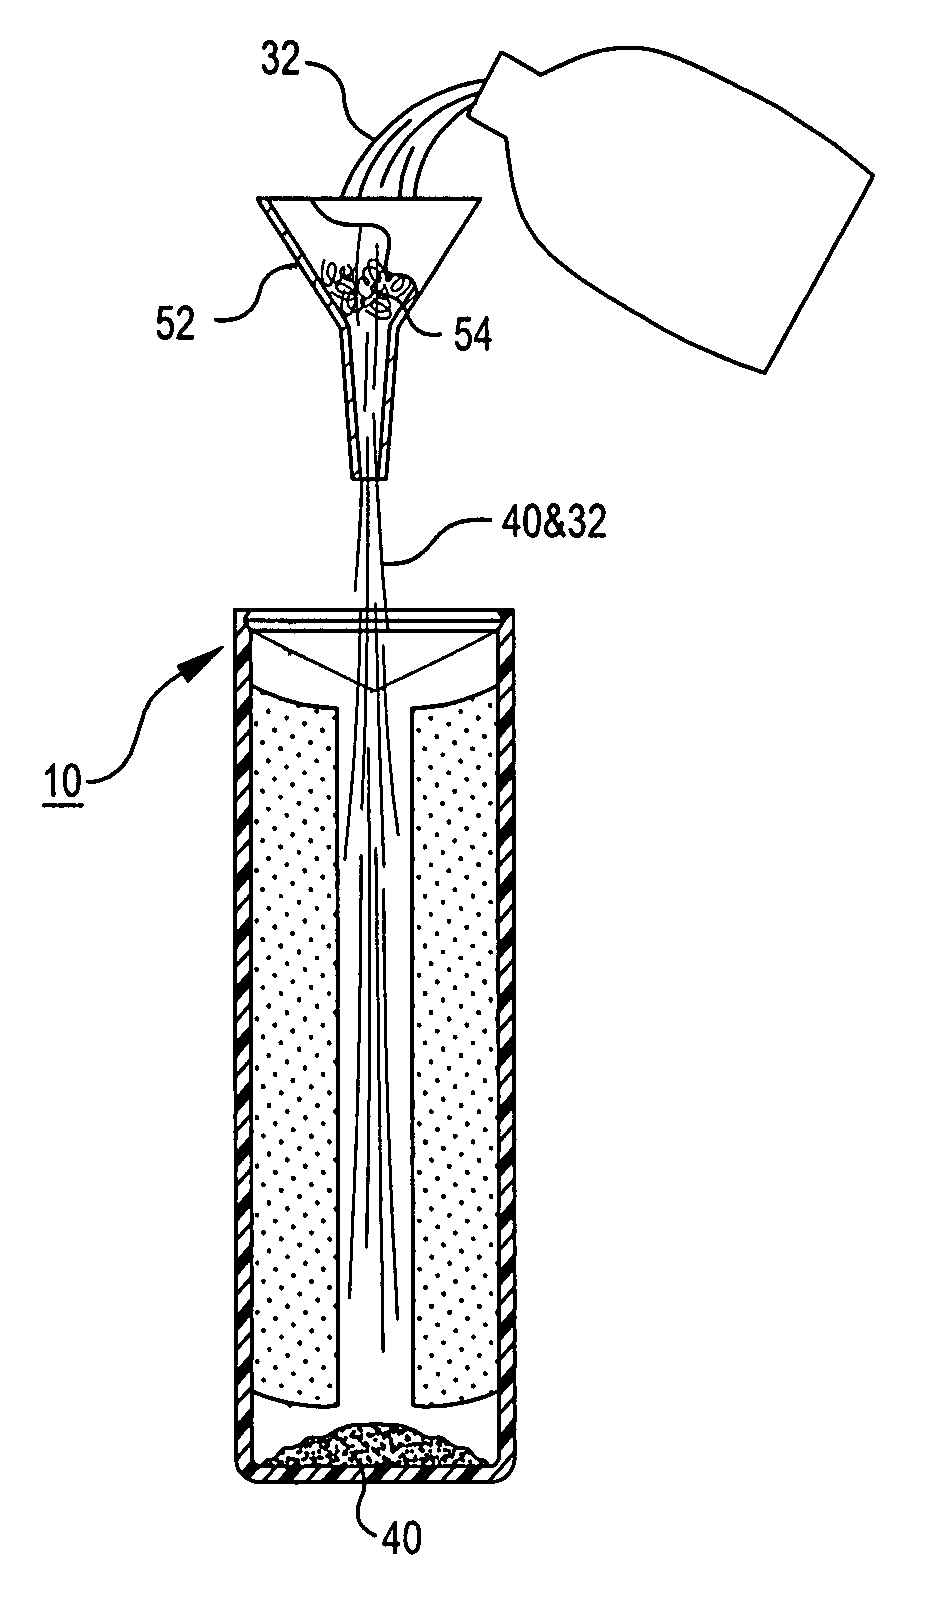 Forward osmosis utilizing a controllable osmotic agent